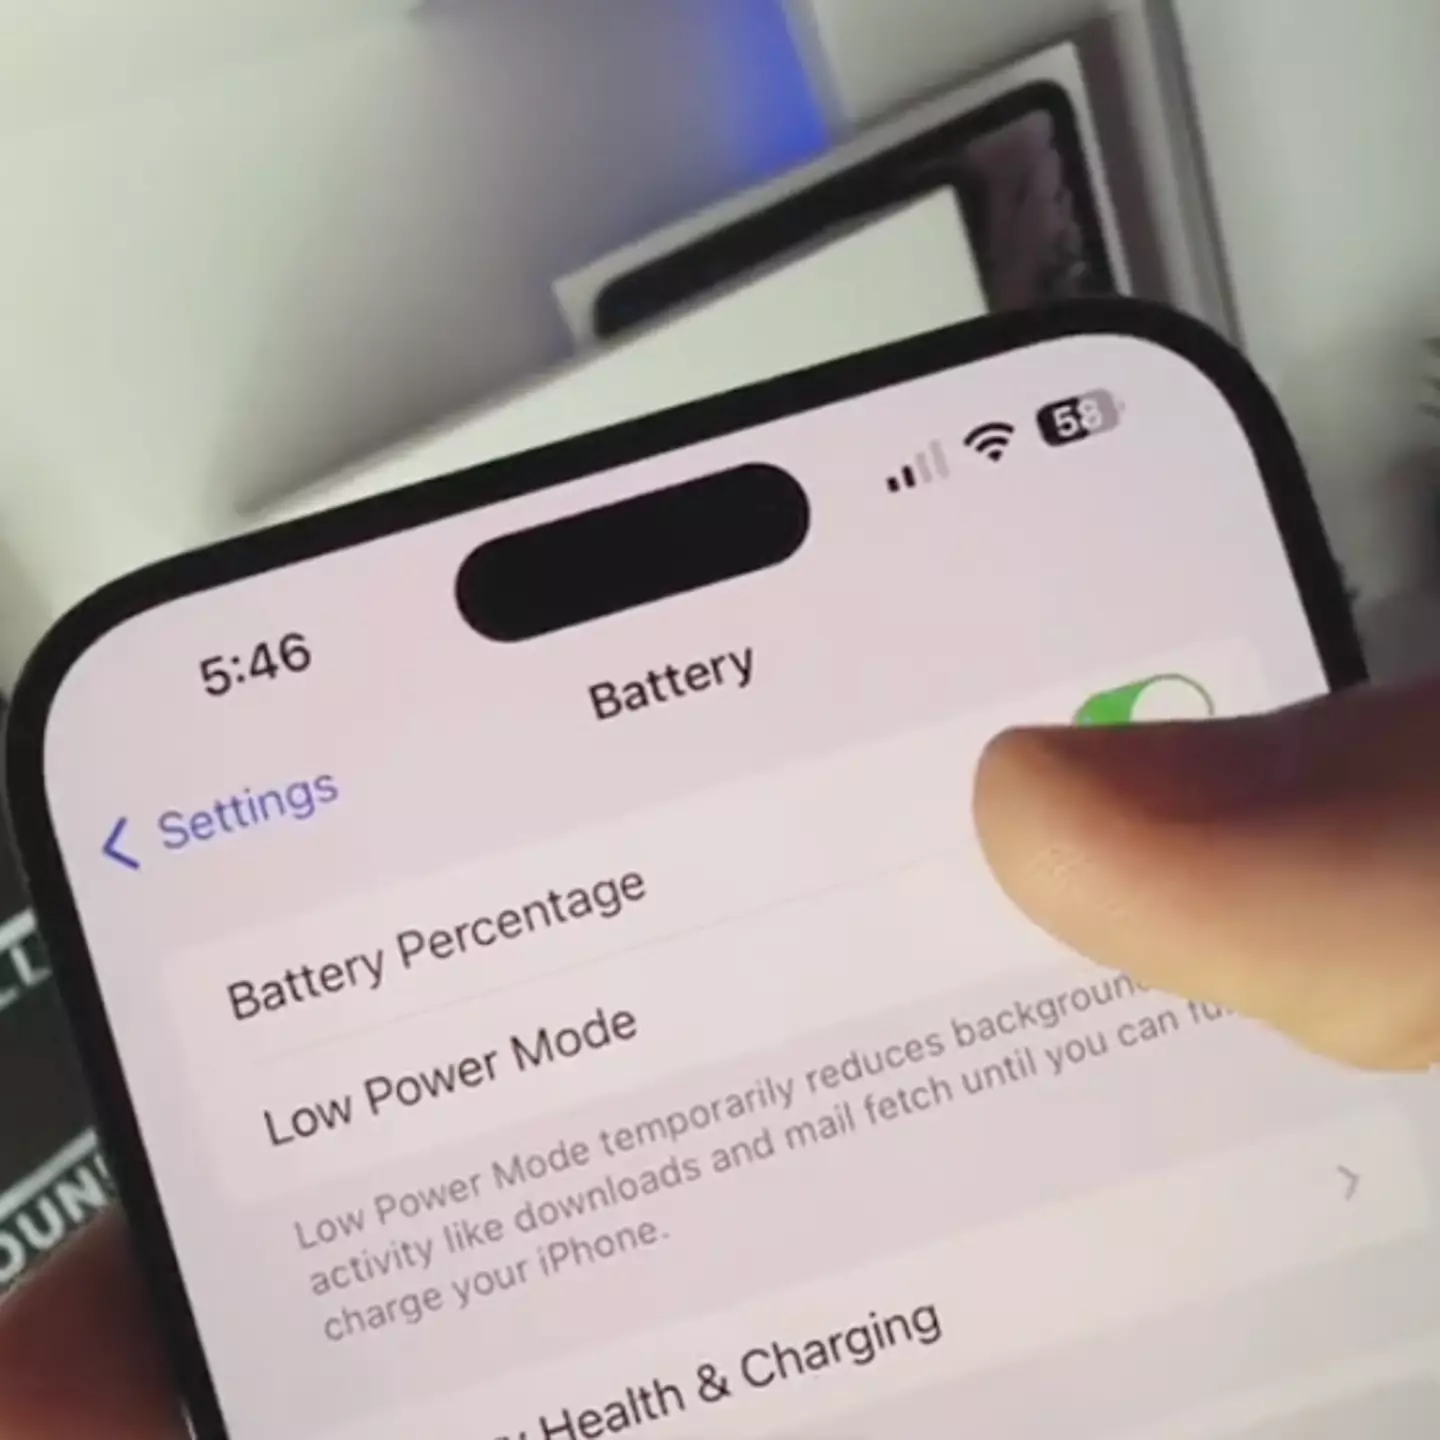 Important reason why you should never have low power mode on constantly